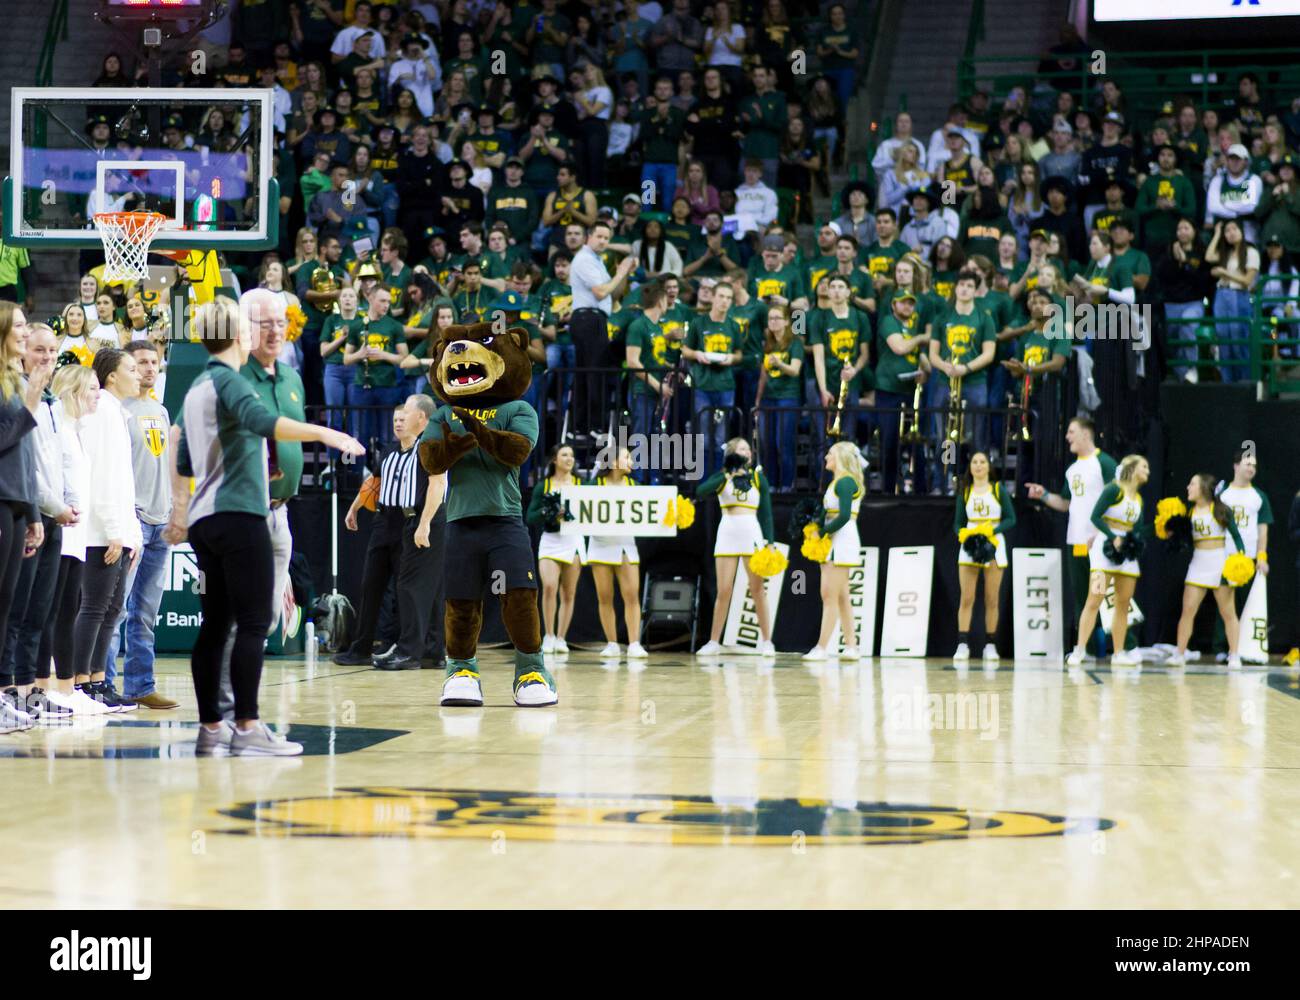 February 19 2022:Baylor Bears mascot during the 2nd half of the NCAA Basketball game between the TCU Horned Frogs and Baylor Bears at Ferrell Center in Waco, Texas. Matthew Lynch/CSM Stock Photo